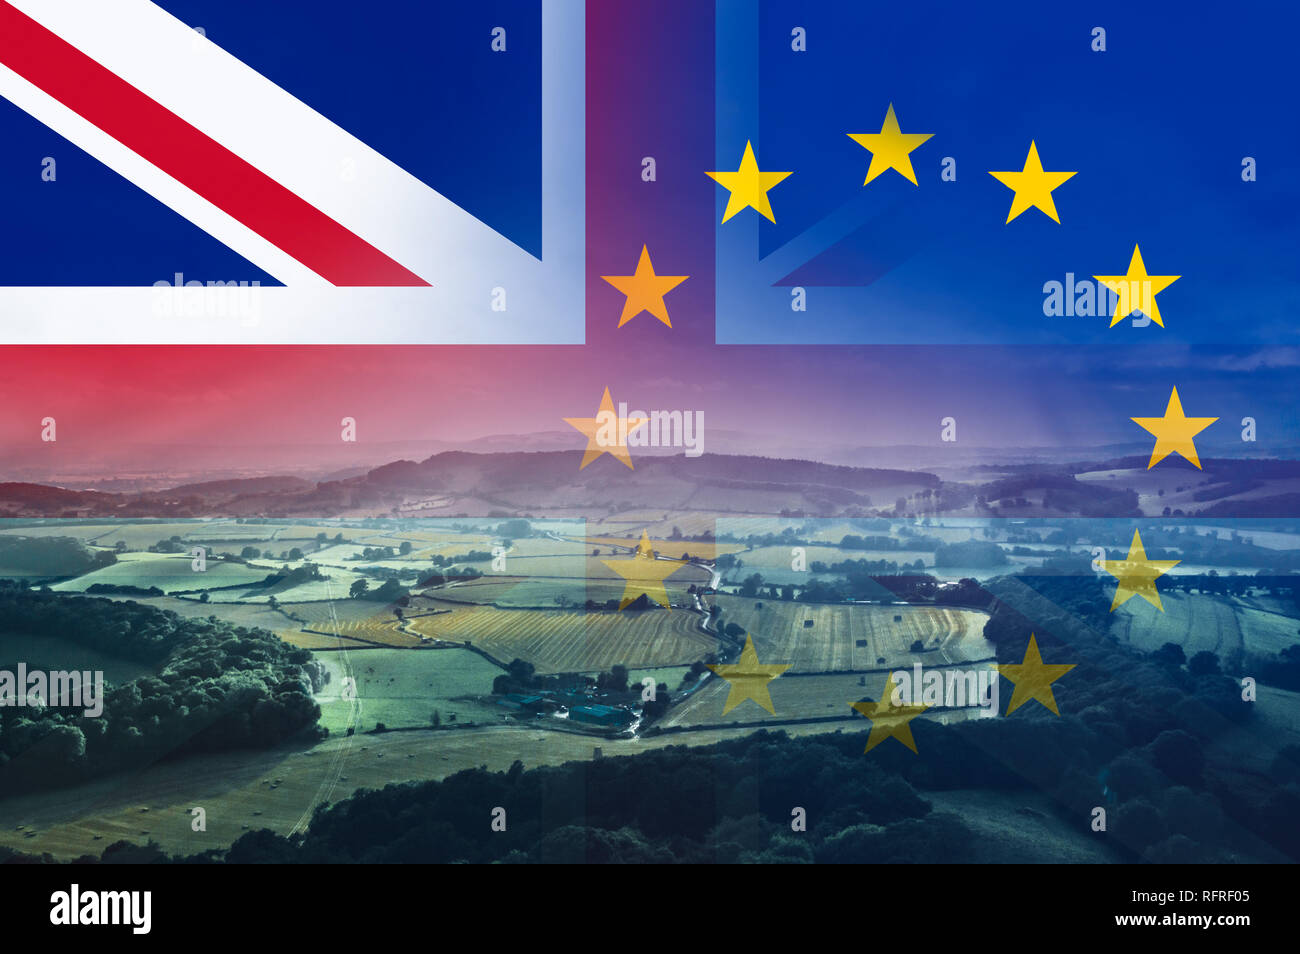 Brexit concept, The English countryside with fields and farms with the Union Jack and E.U flags over layered on top. Stock Photo